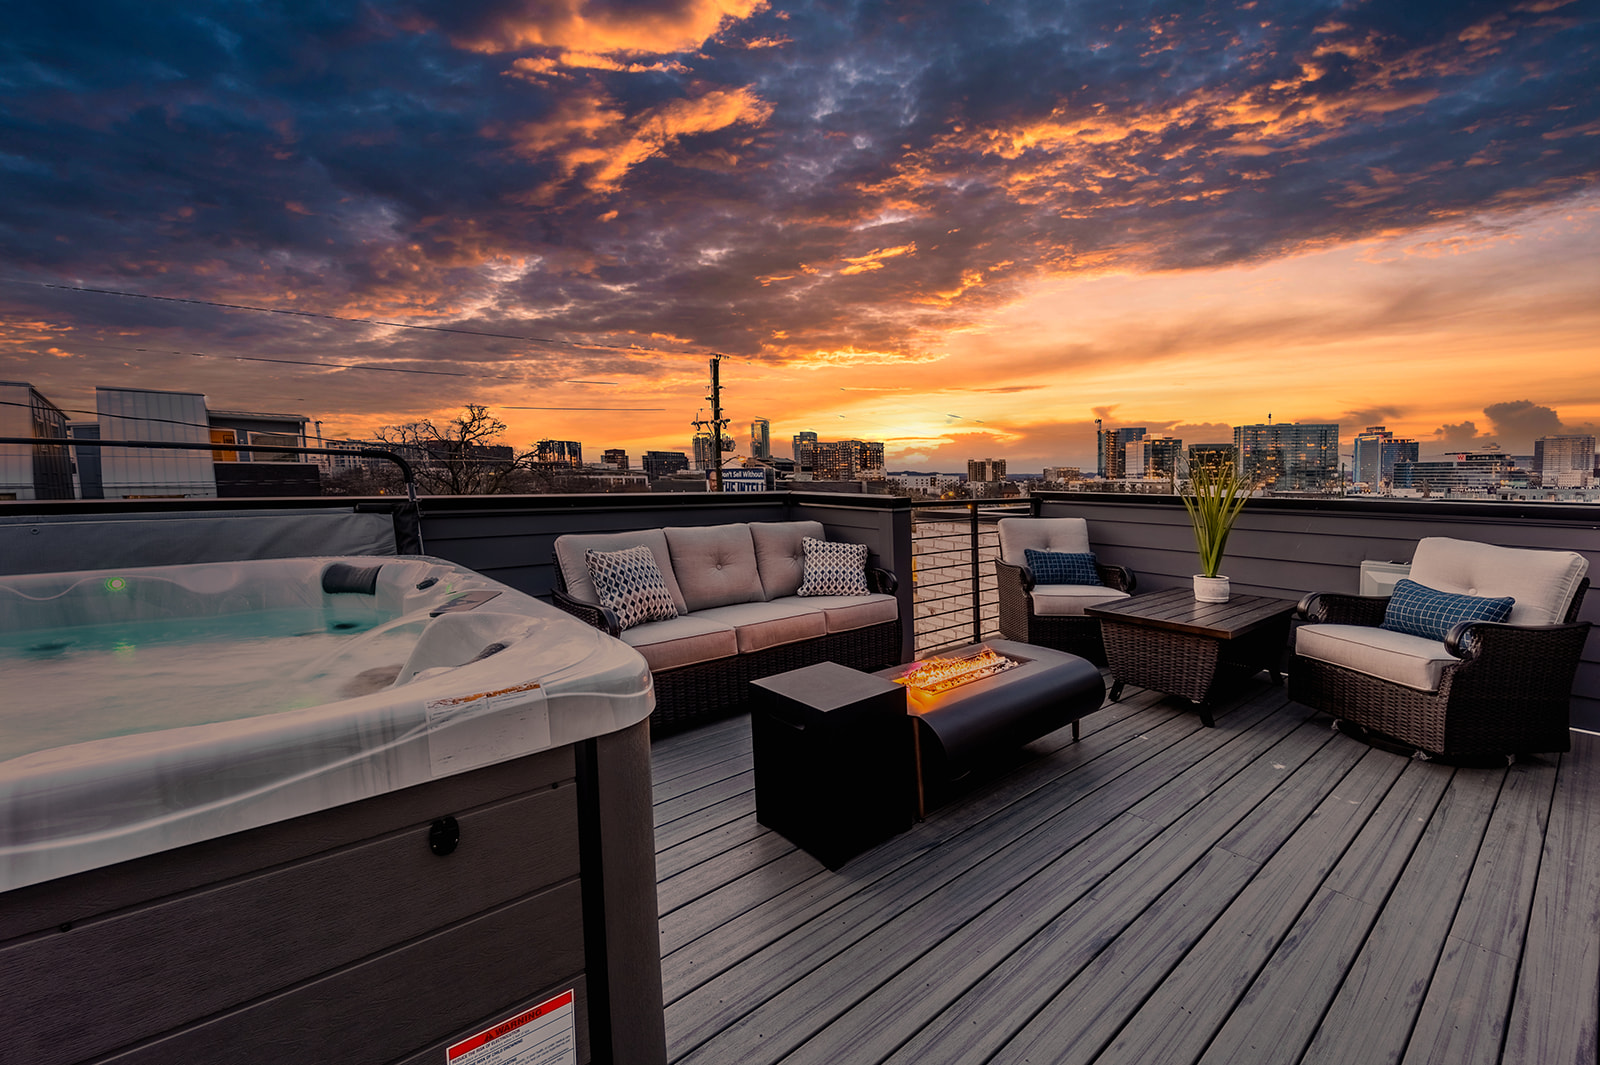 Unit 1: Private rooftop deck with incredible views of downtown. Complete with HOT TUB, outdoor BBQ, fire pit, and lounge area.